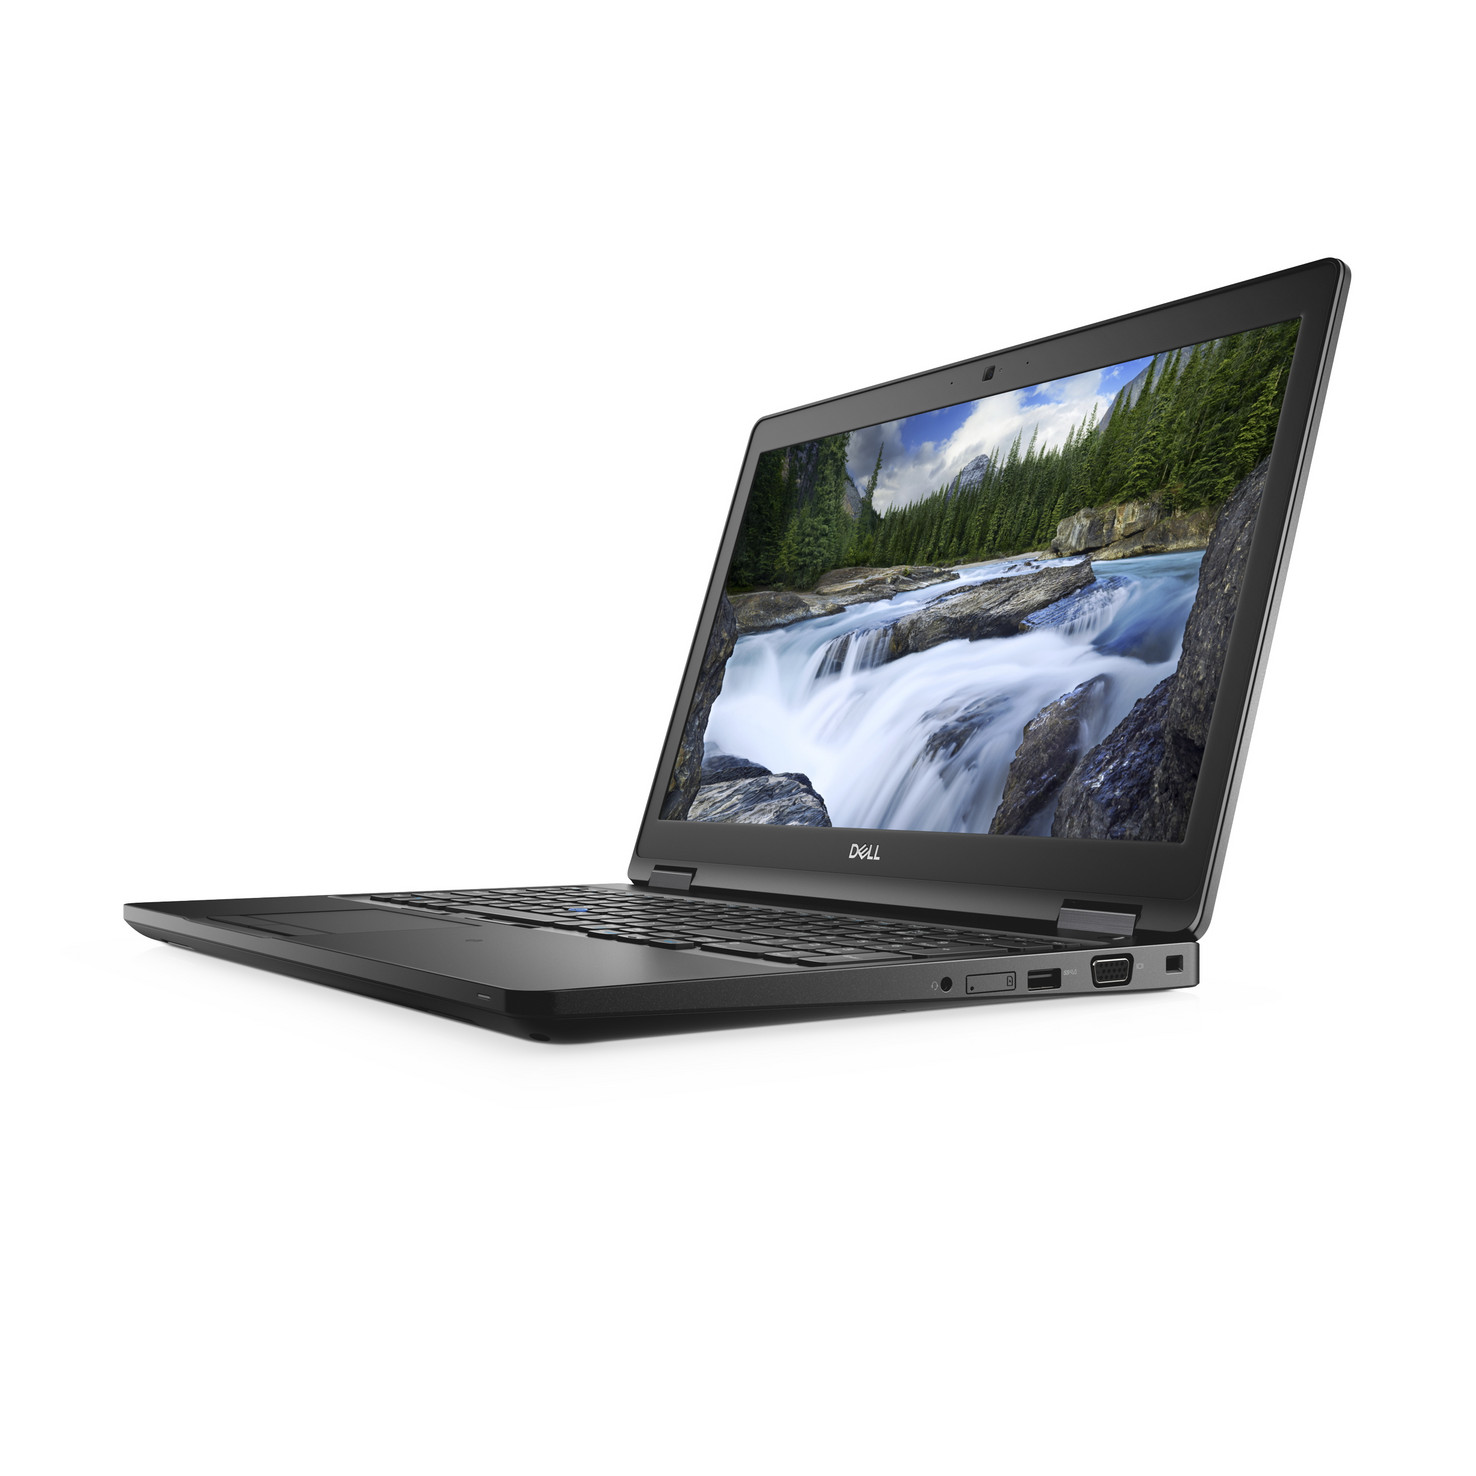 DELL LATITUDE 5590 N066L559015EMEA_U I5-8350U 8GB 256GB SSD O/B VGA 15.6" FHD LINUX NOTEBOOK